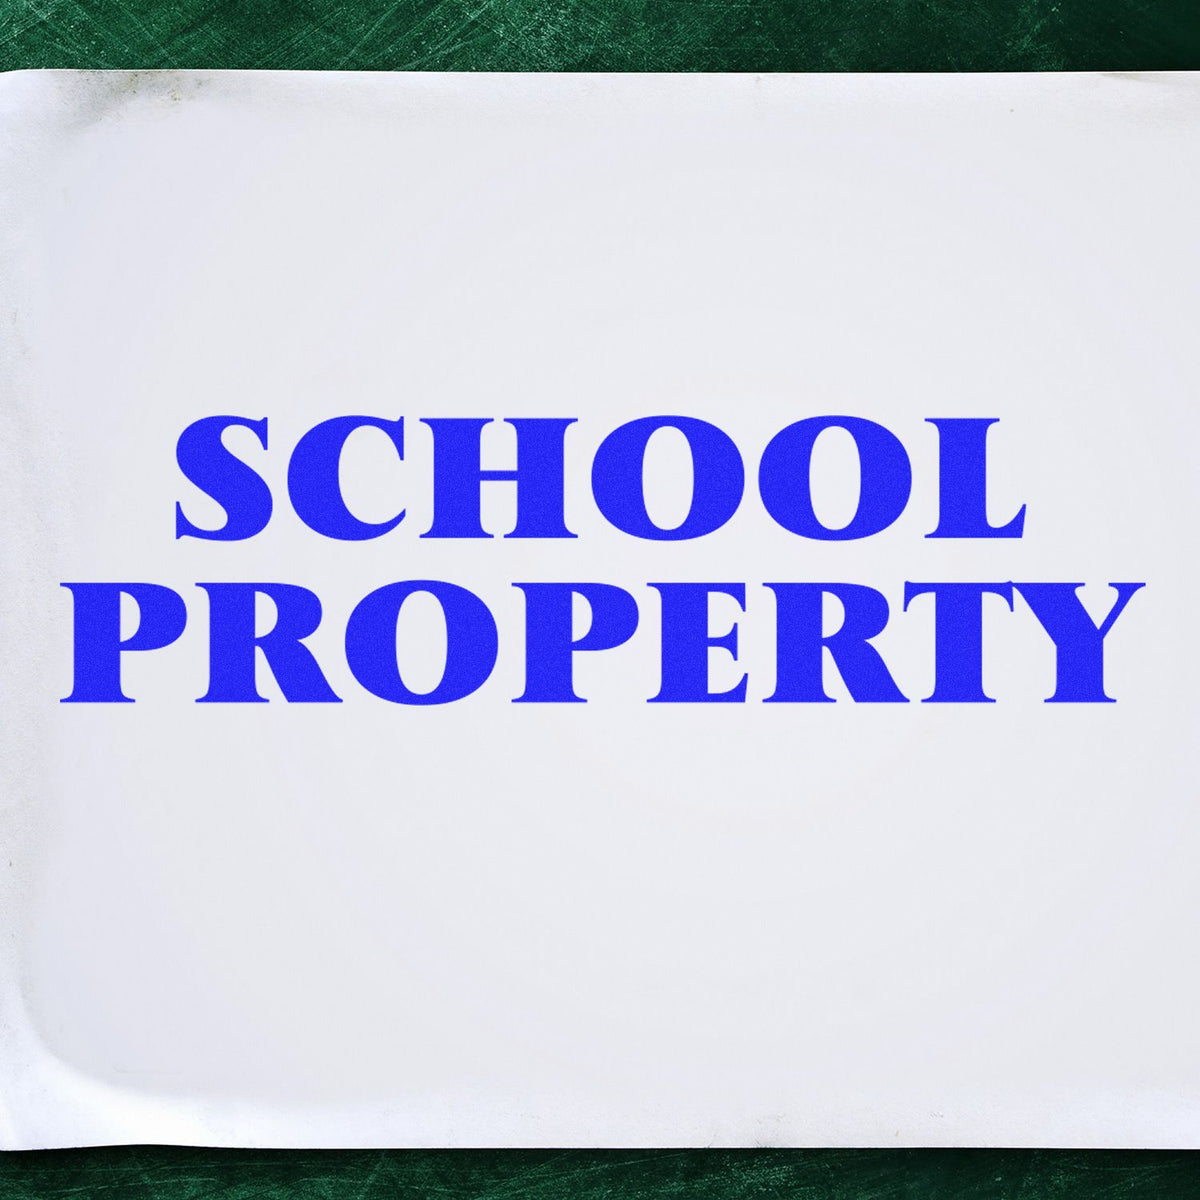 Large Self-Inking School Property Stamp In Use Photo